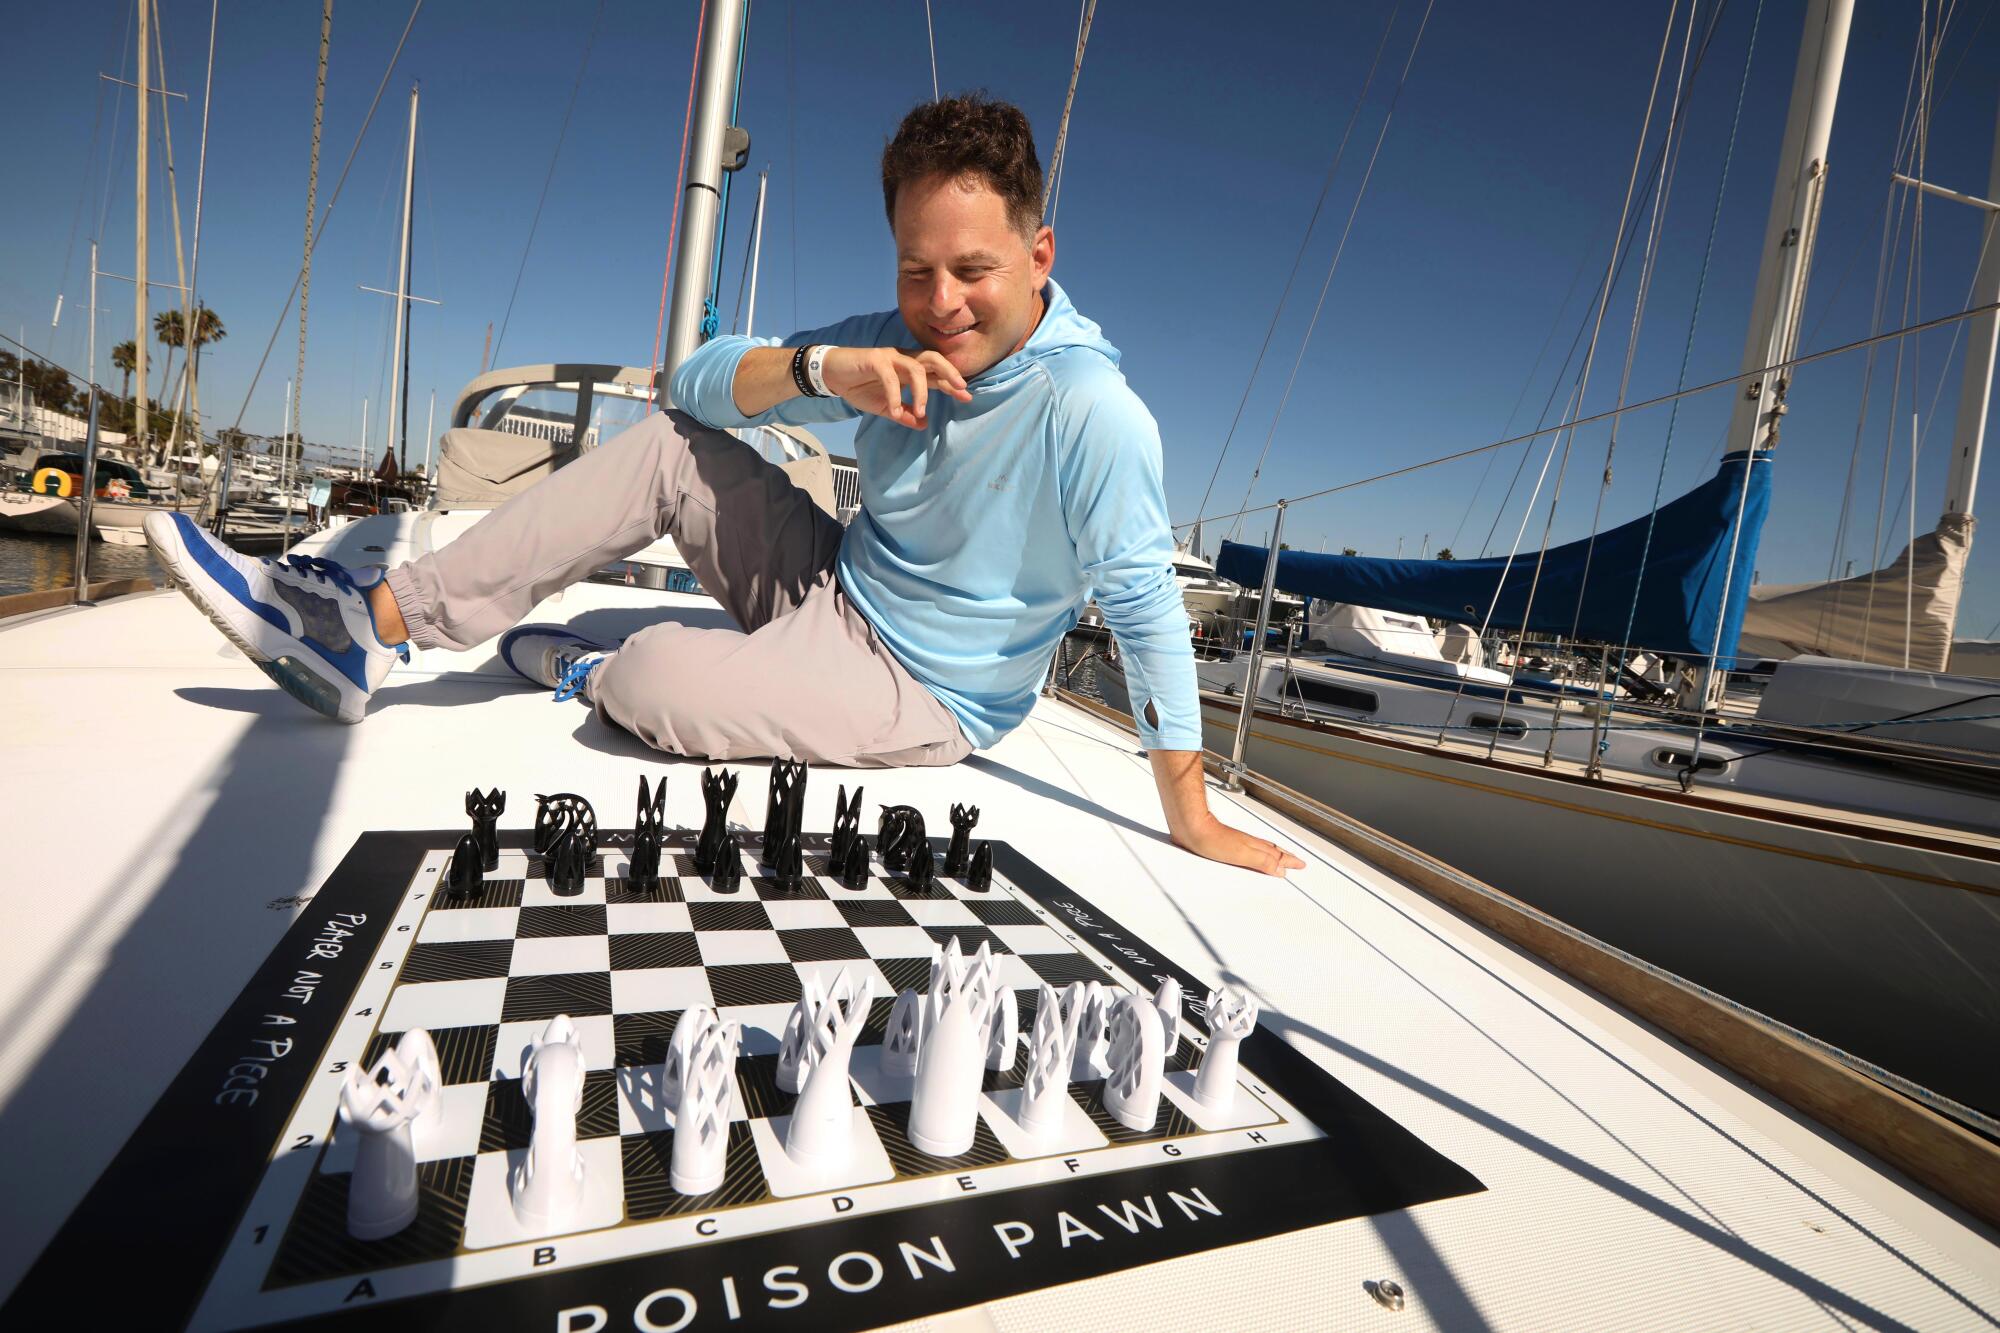 Chess master Seth Makowsky on his boat in Marina del Rey on October 5, 2023 with chess board on deck.